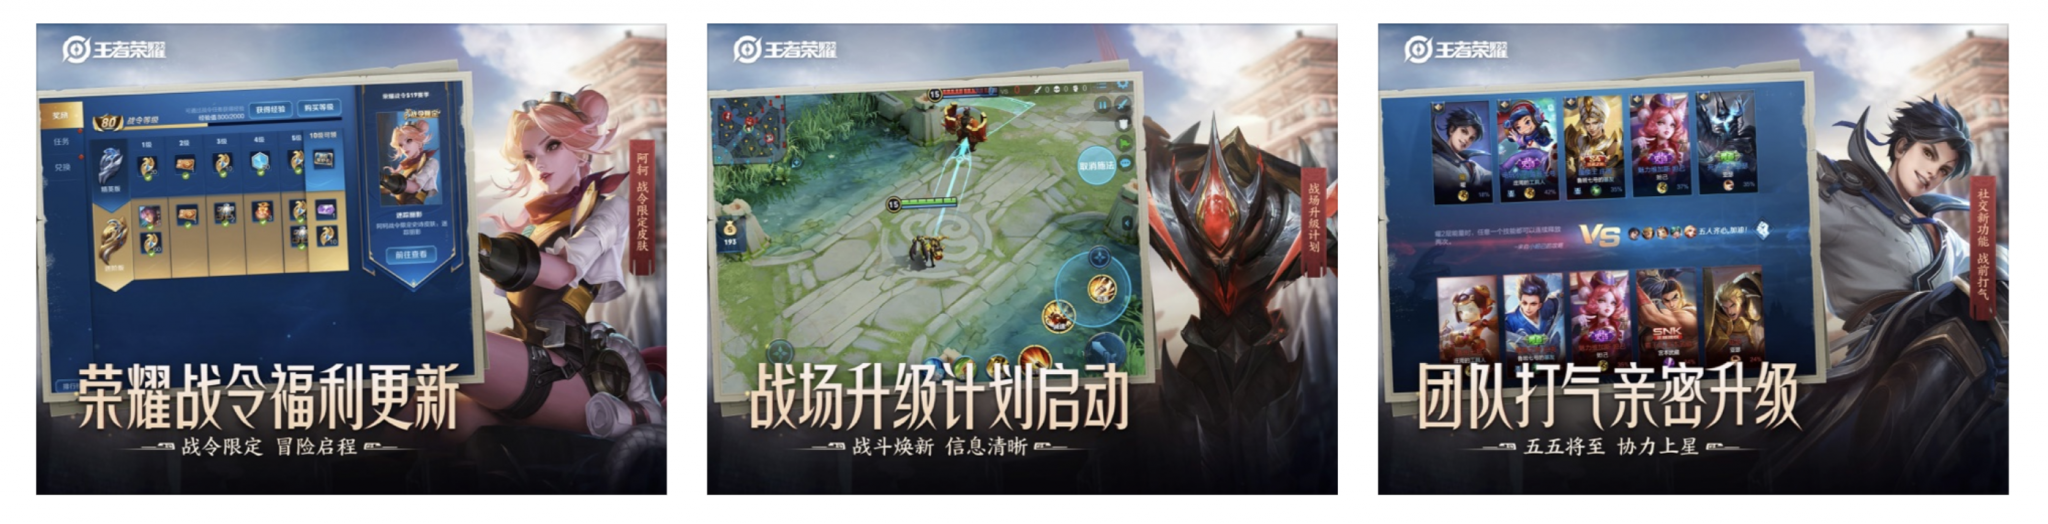 sources tencent timi honor kings call